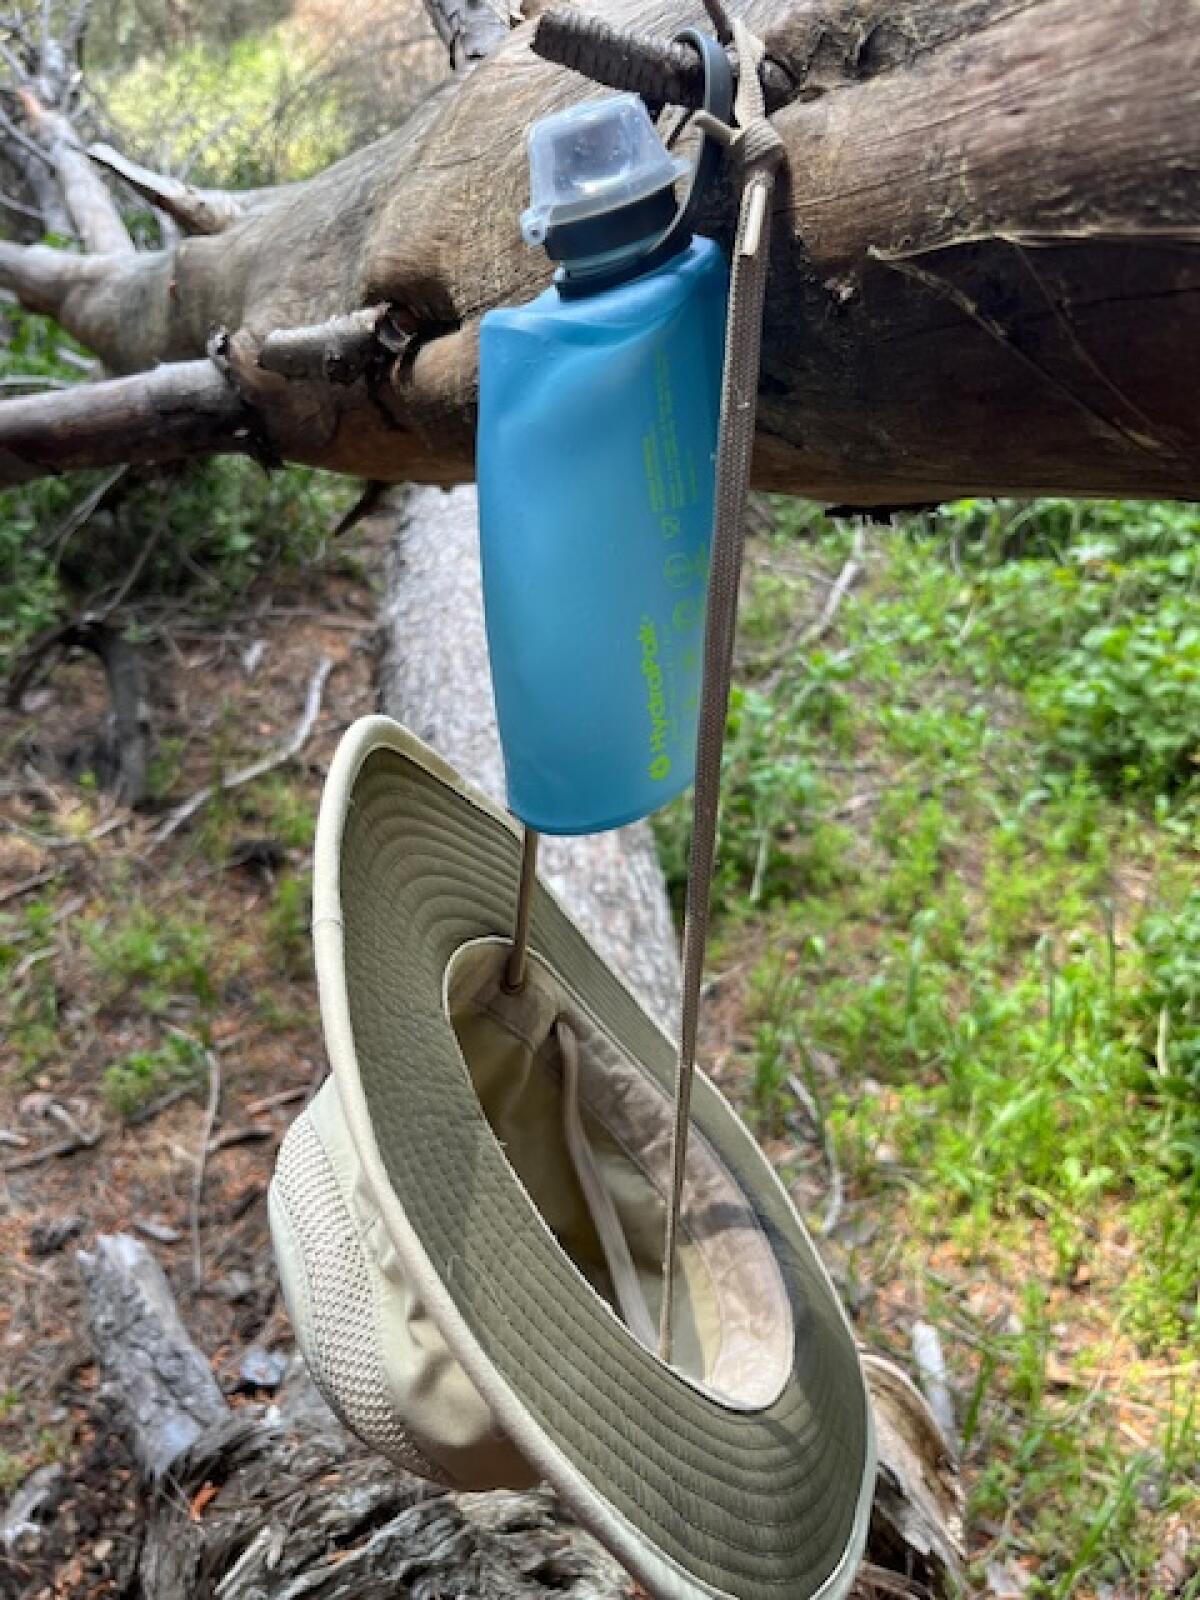 A hat and water bottle hanging on a tree branch in the forest.